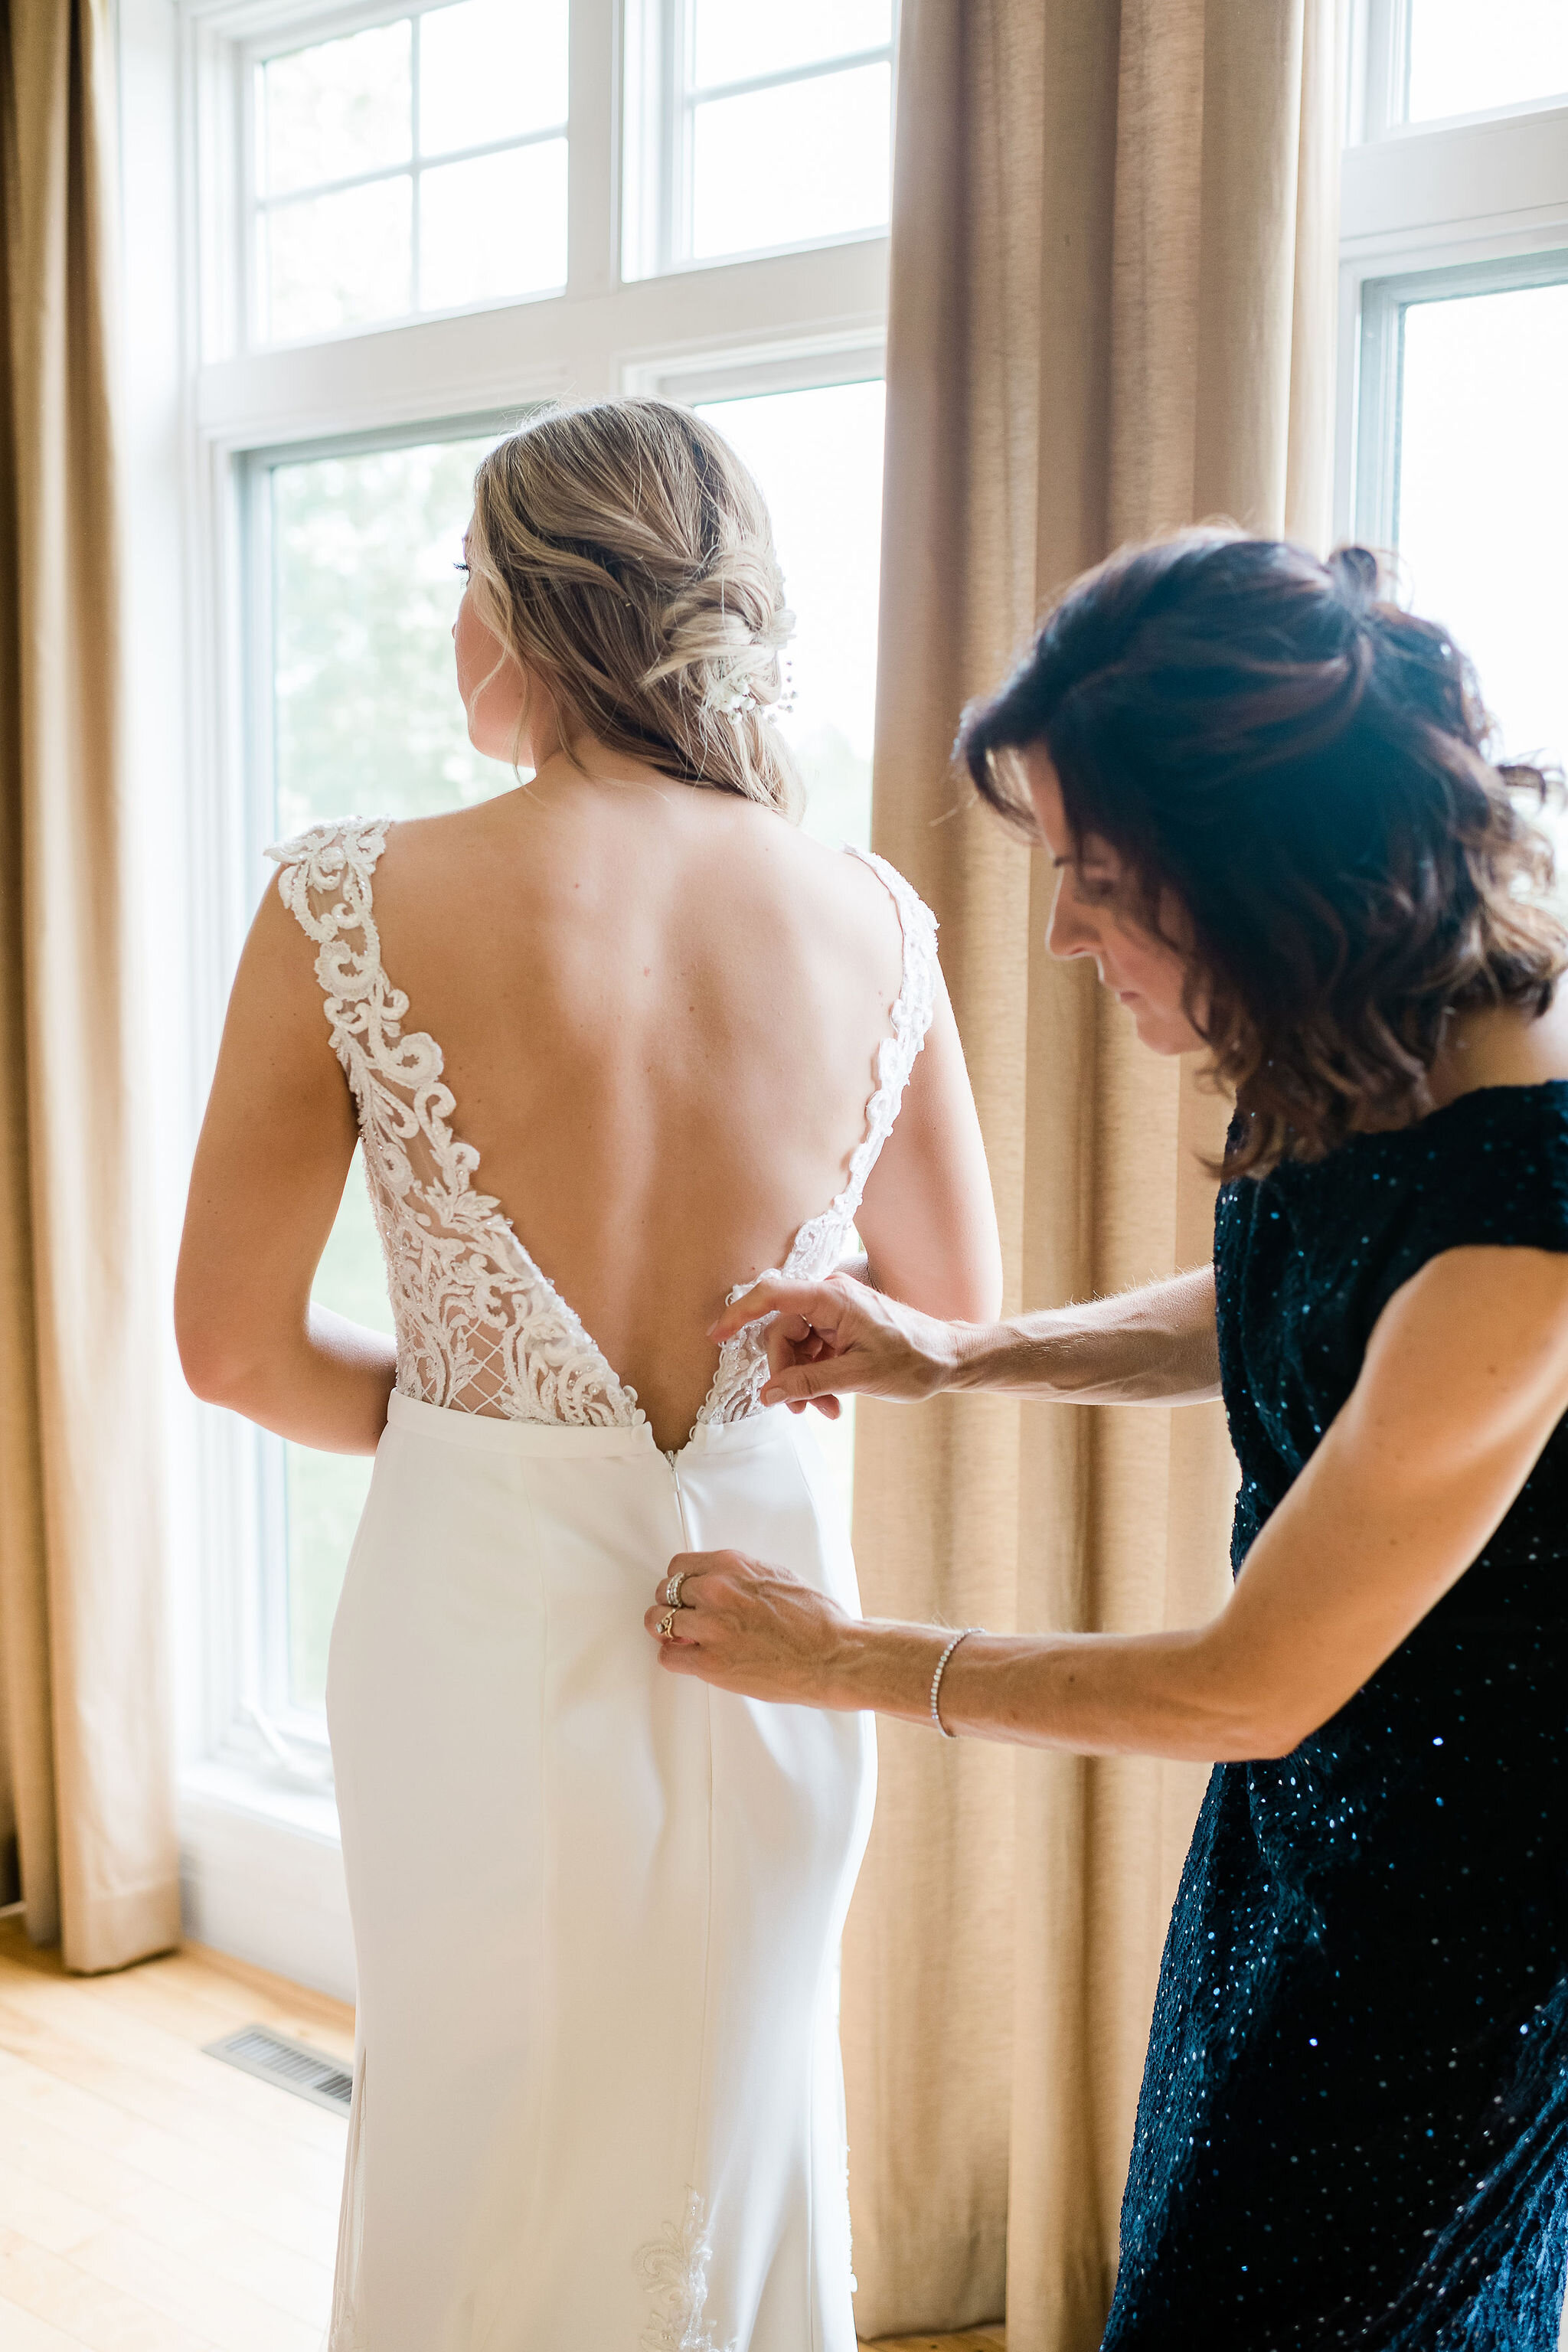 Mother of the bride zipping up bride's wedding dress